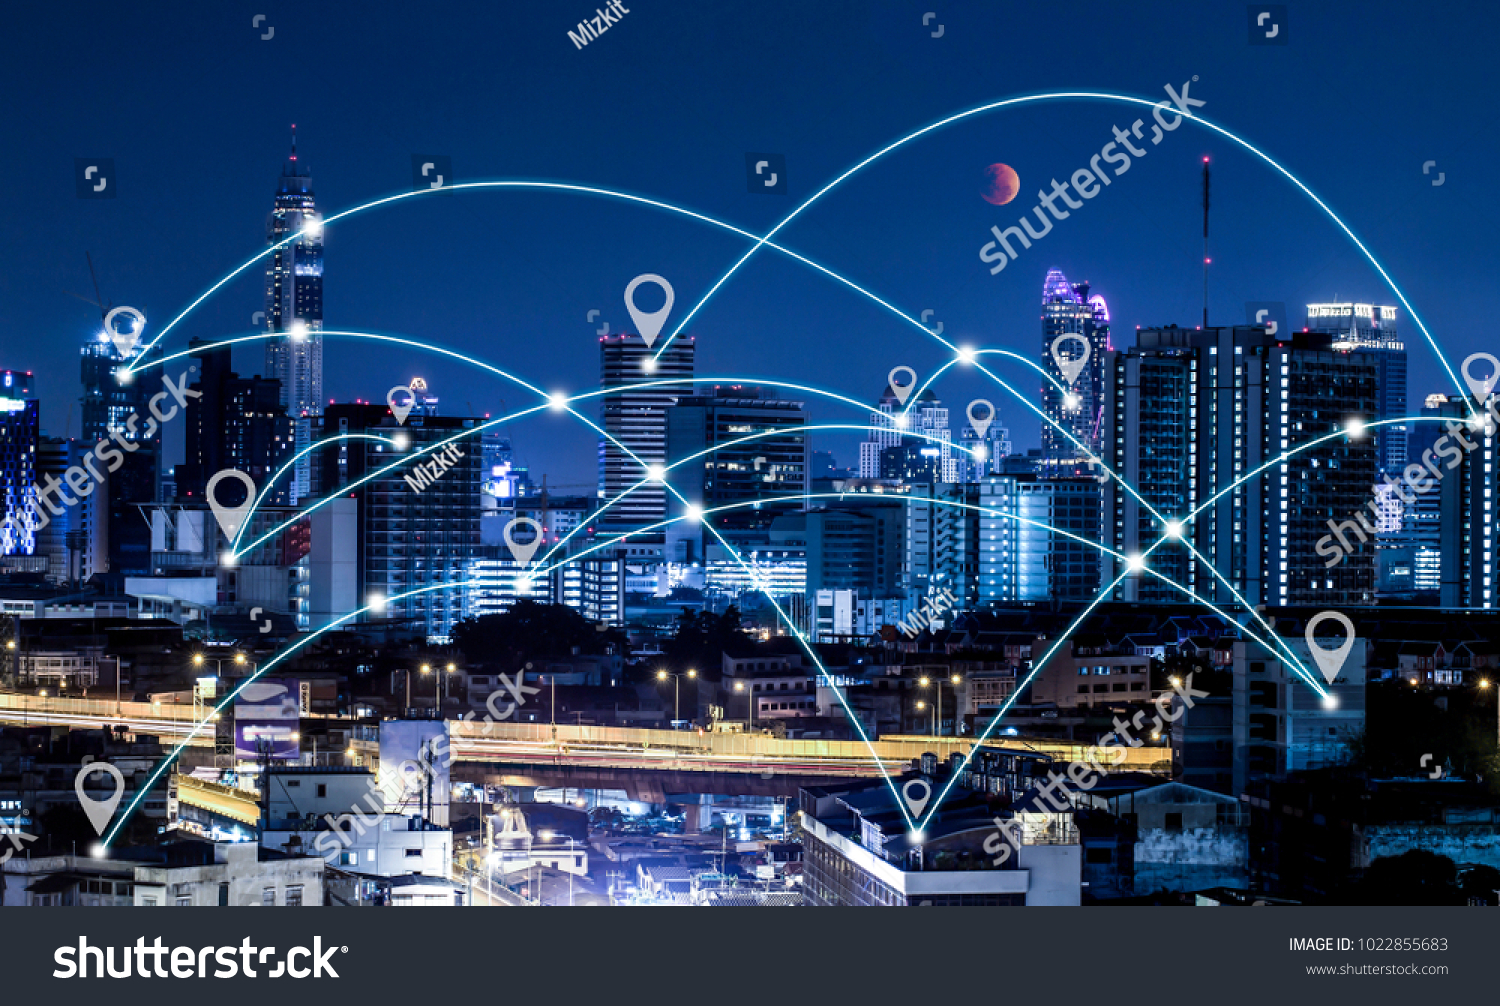 Location or Map pin flat above bangkok city scape night scene, network connection concept #1022855683